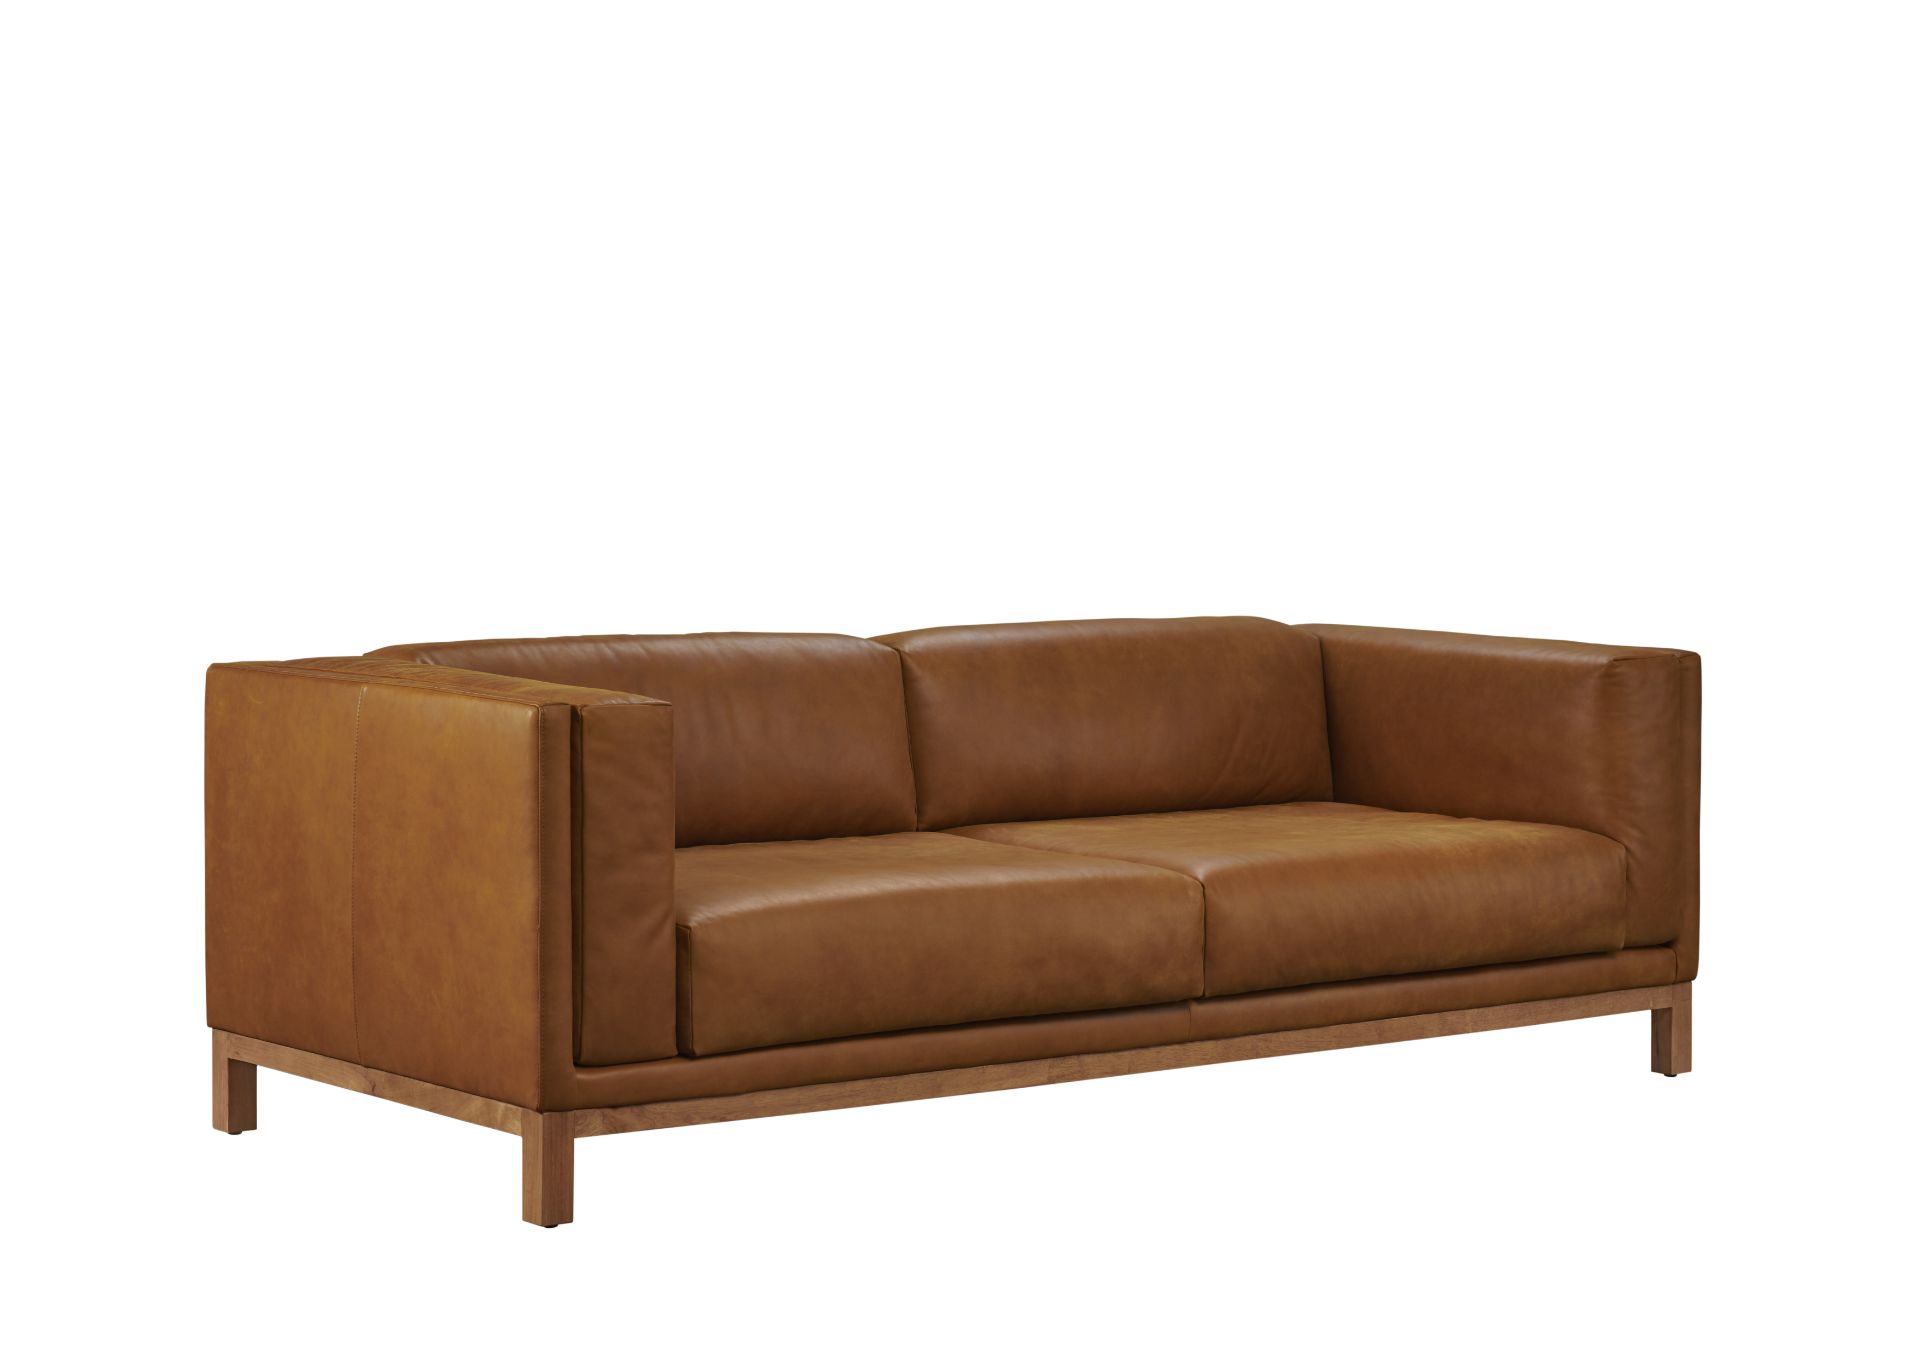 Mid Century 3 Seater Sofa Tan Leather A must have item in any home. The timeless sofa features